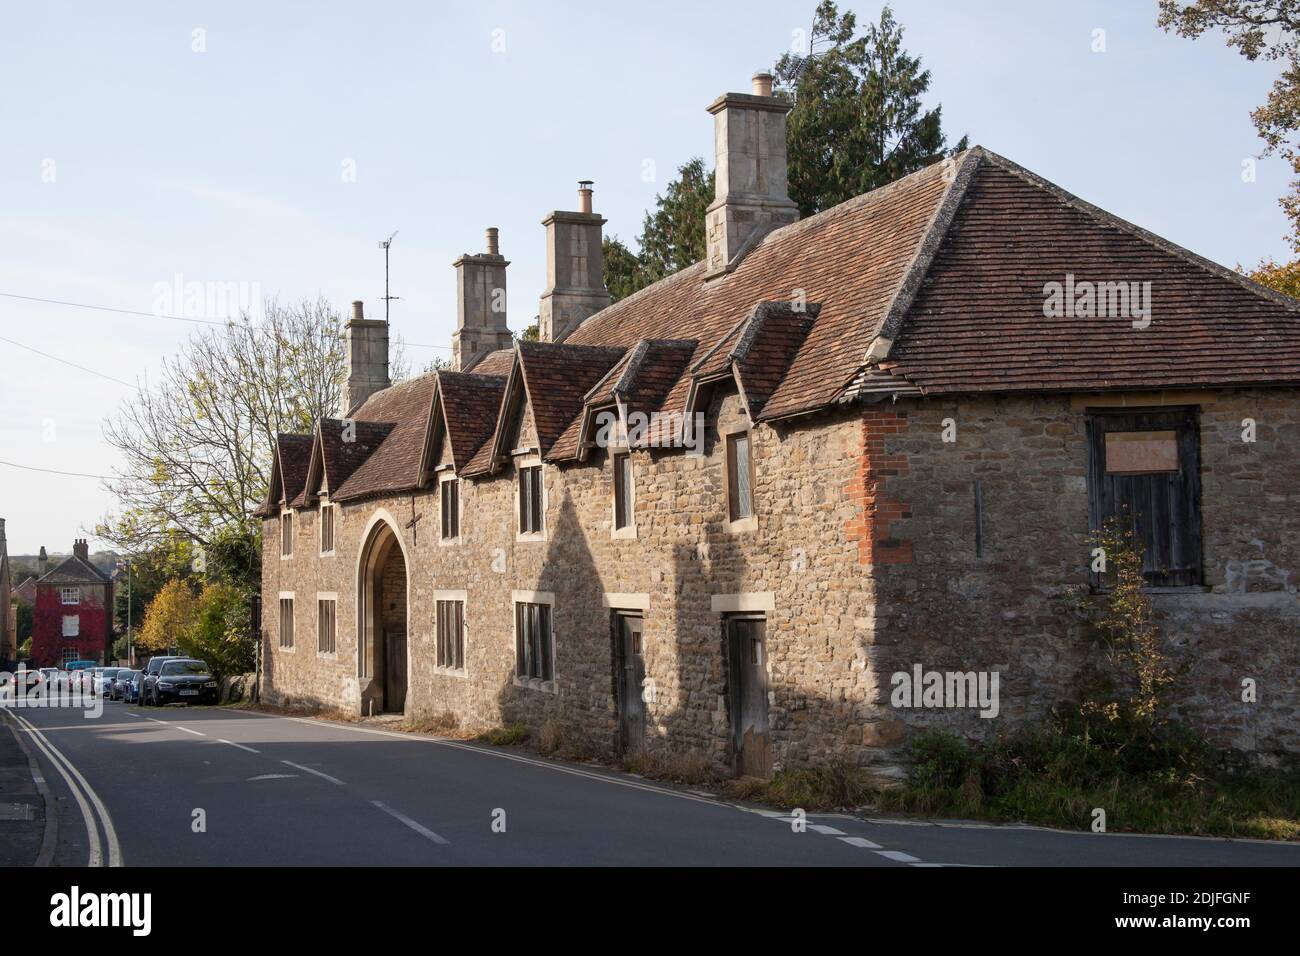 A row of houses in Faringdon, Oxfordshire in the UK, taken on the 19th of October 2020 Stock Photo